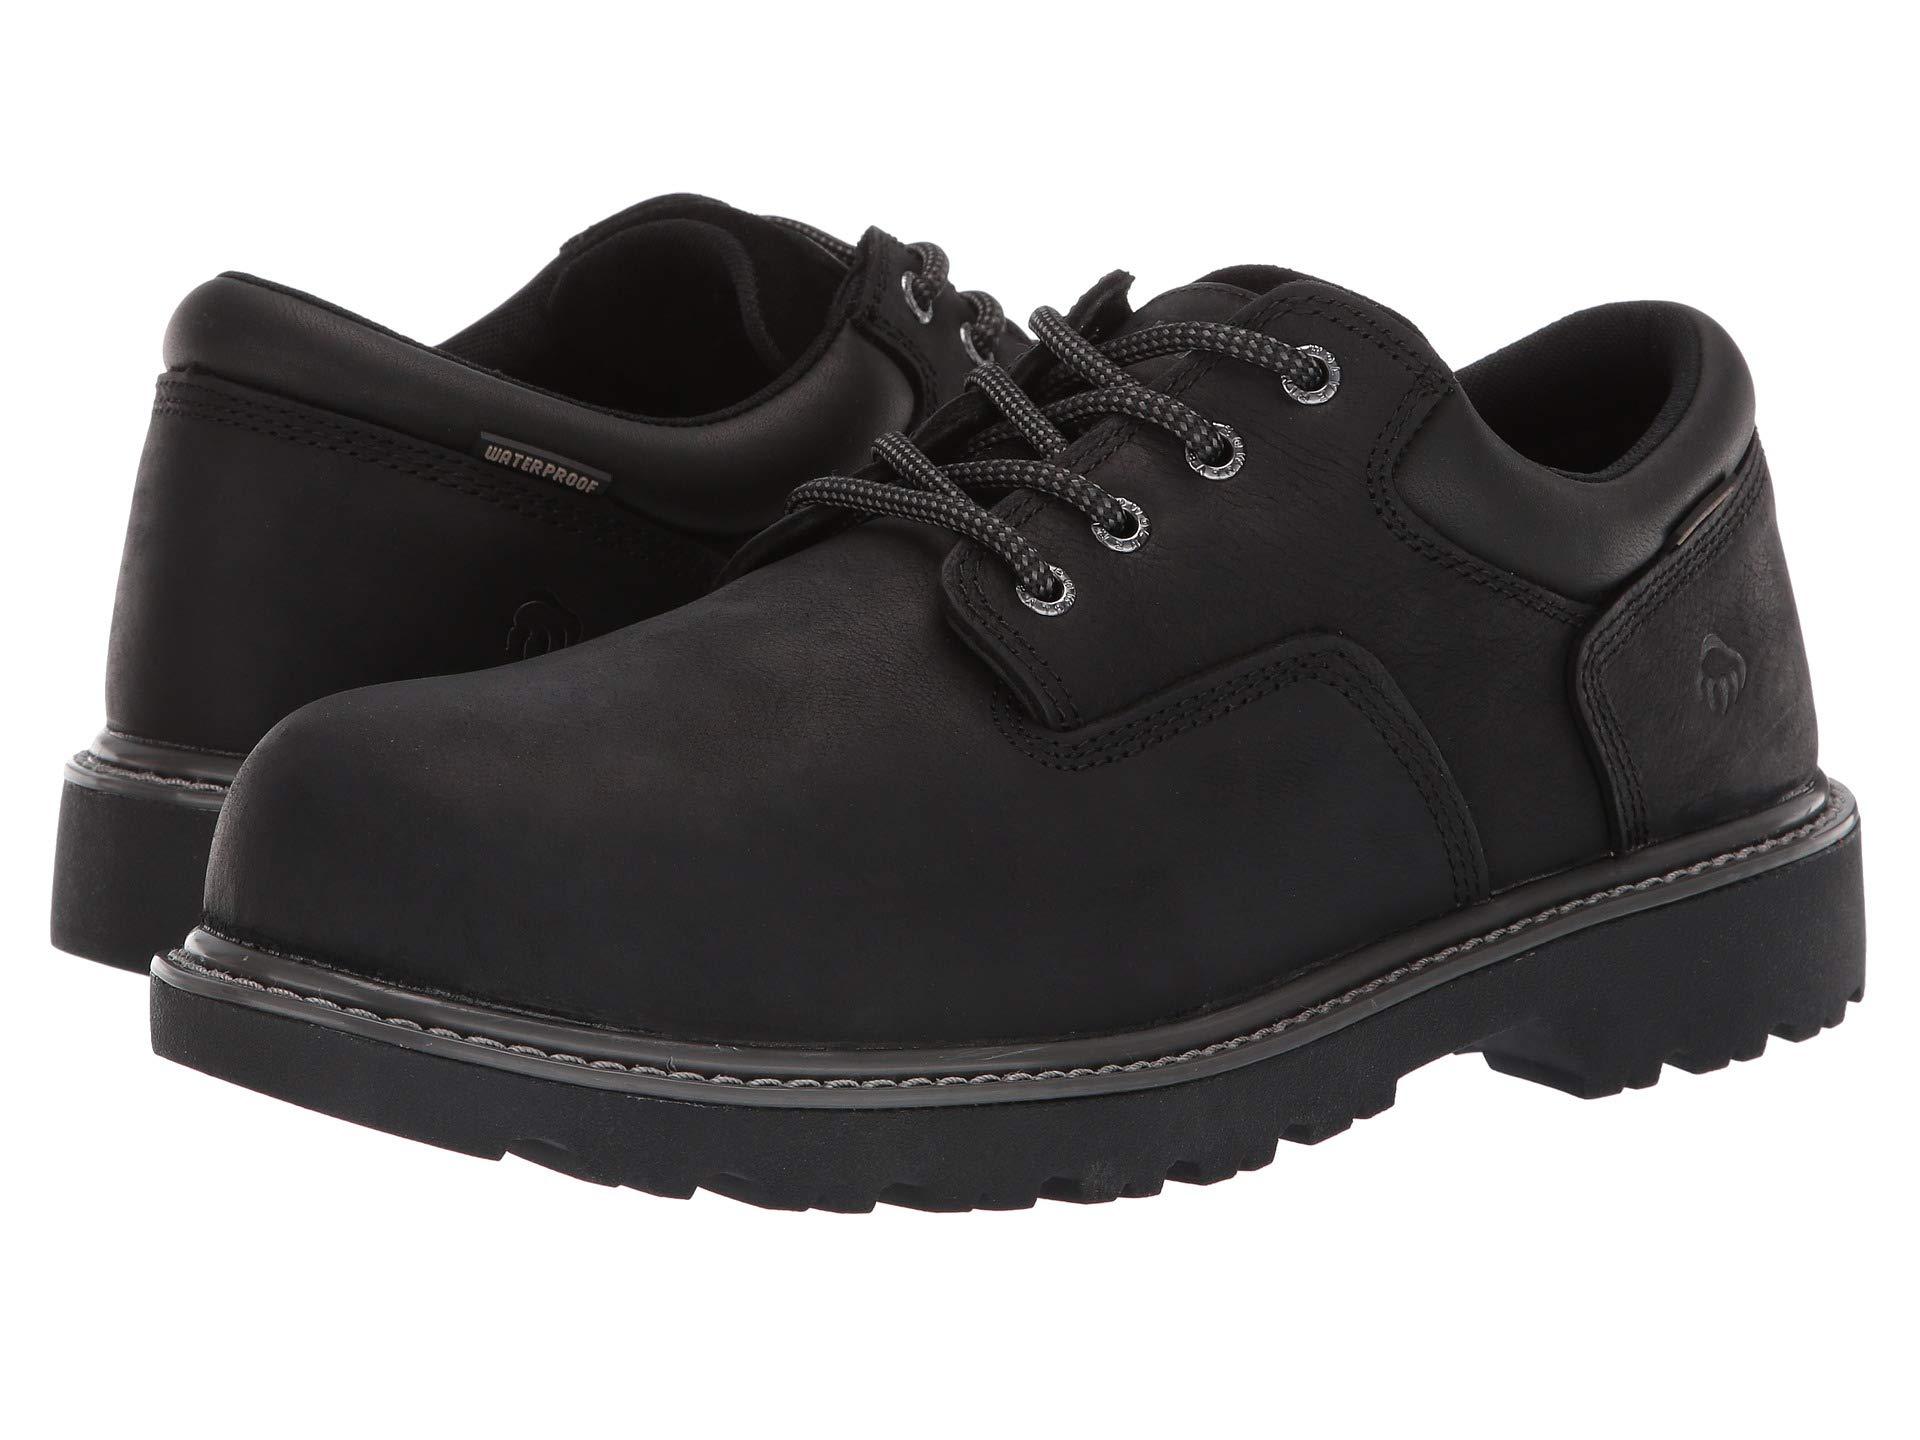 Wolverine Leather Floorhand Oxford Steel Toe Construction Shoe in Black ...